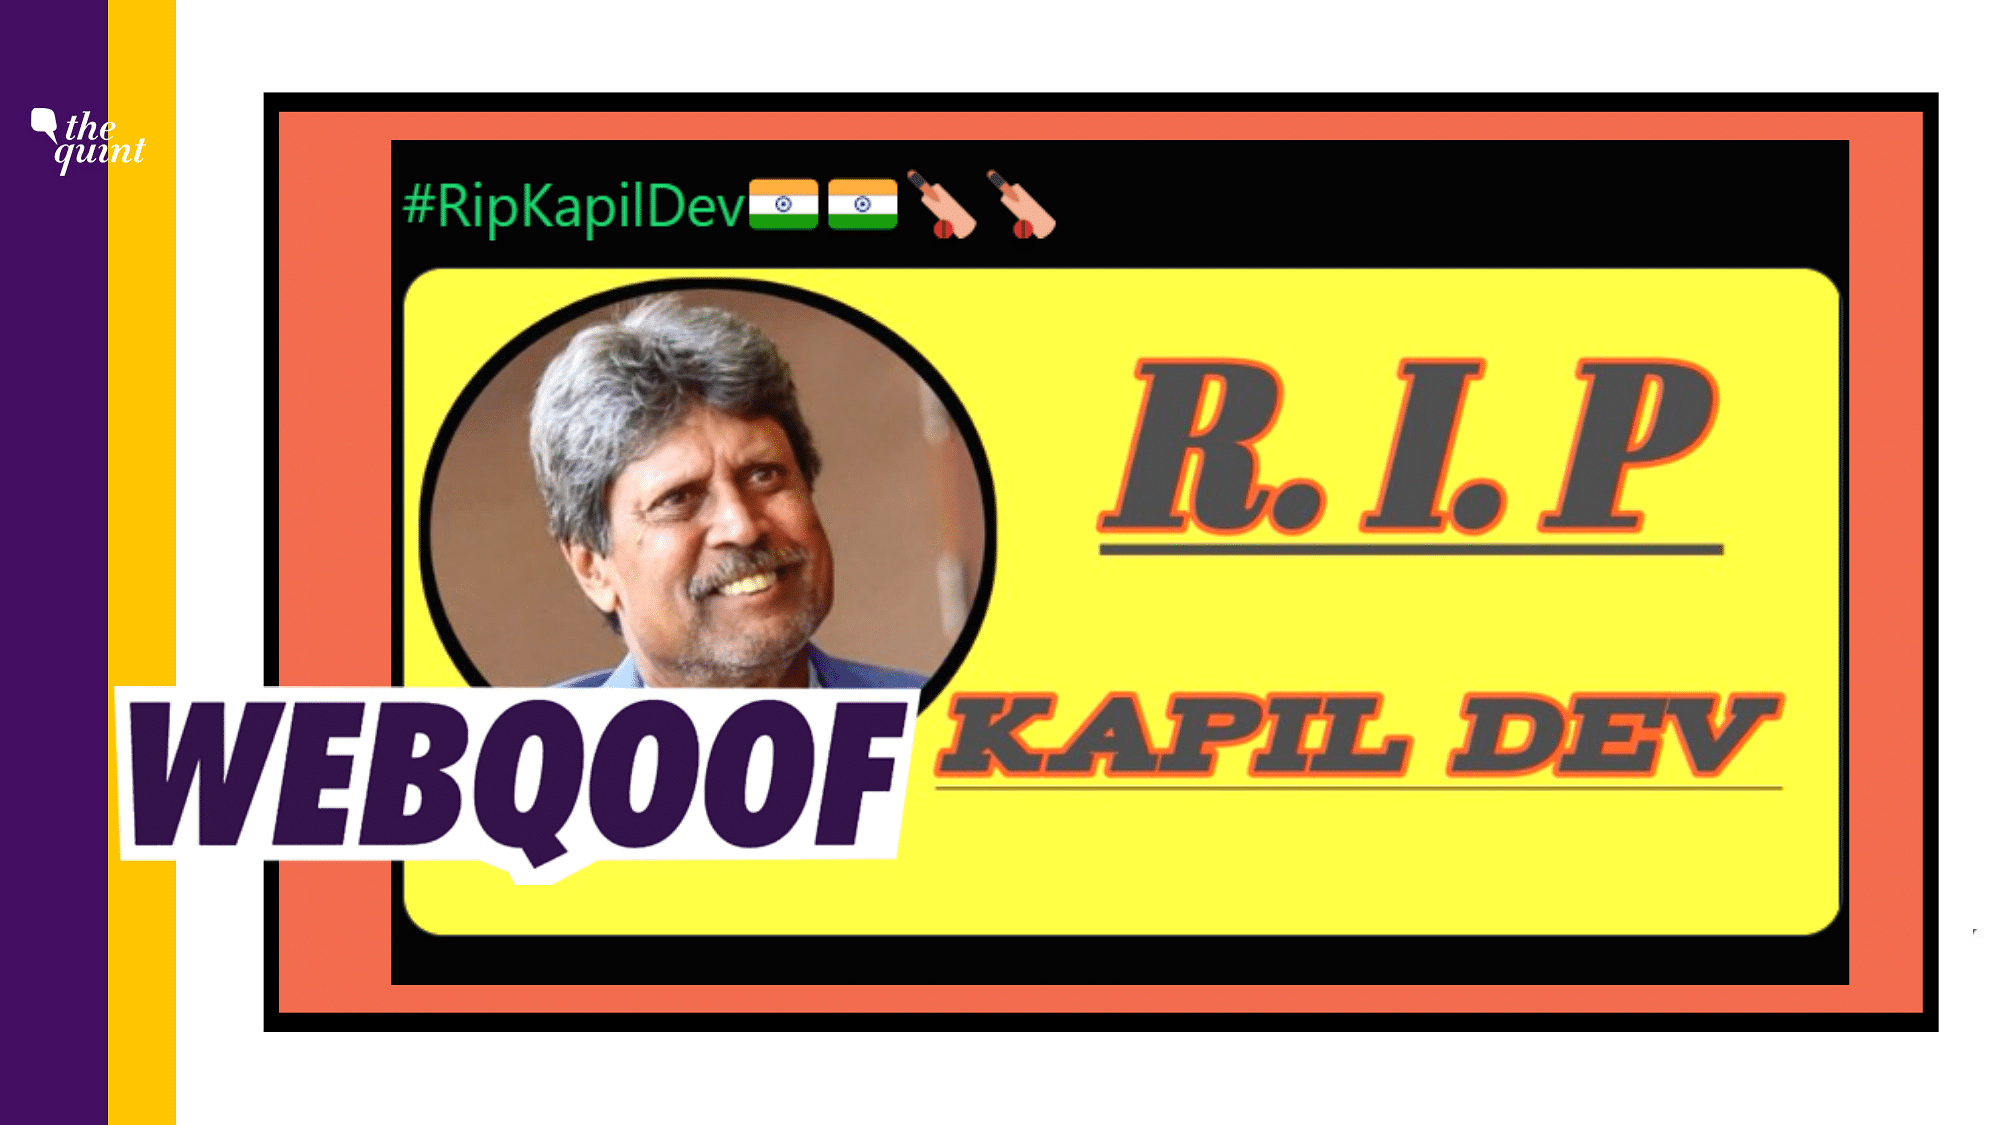 Kapil Dev has quashed the rumours by sharing a video of him on a WhatsApp group. An archive of the post can be found <a href="https://archive.is/9vh9v">here</a>.